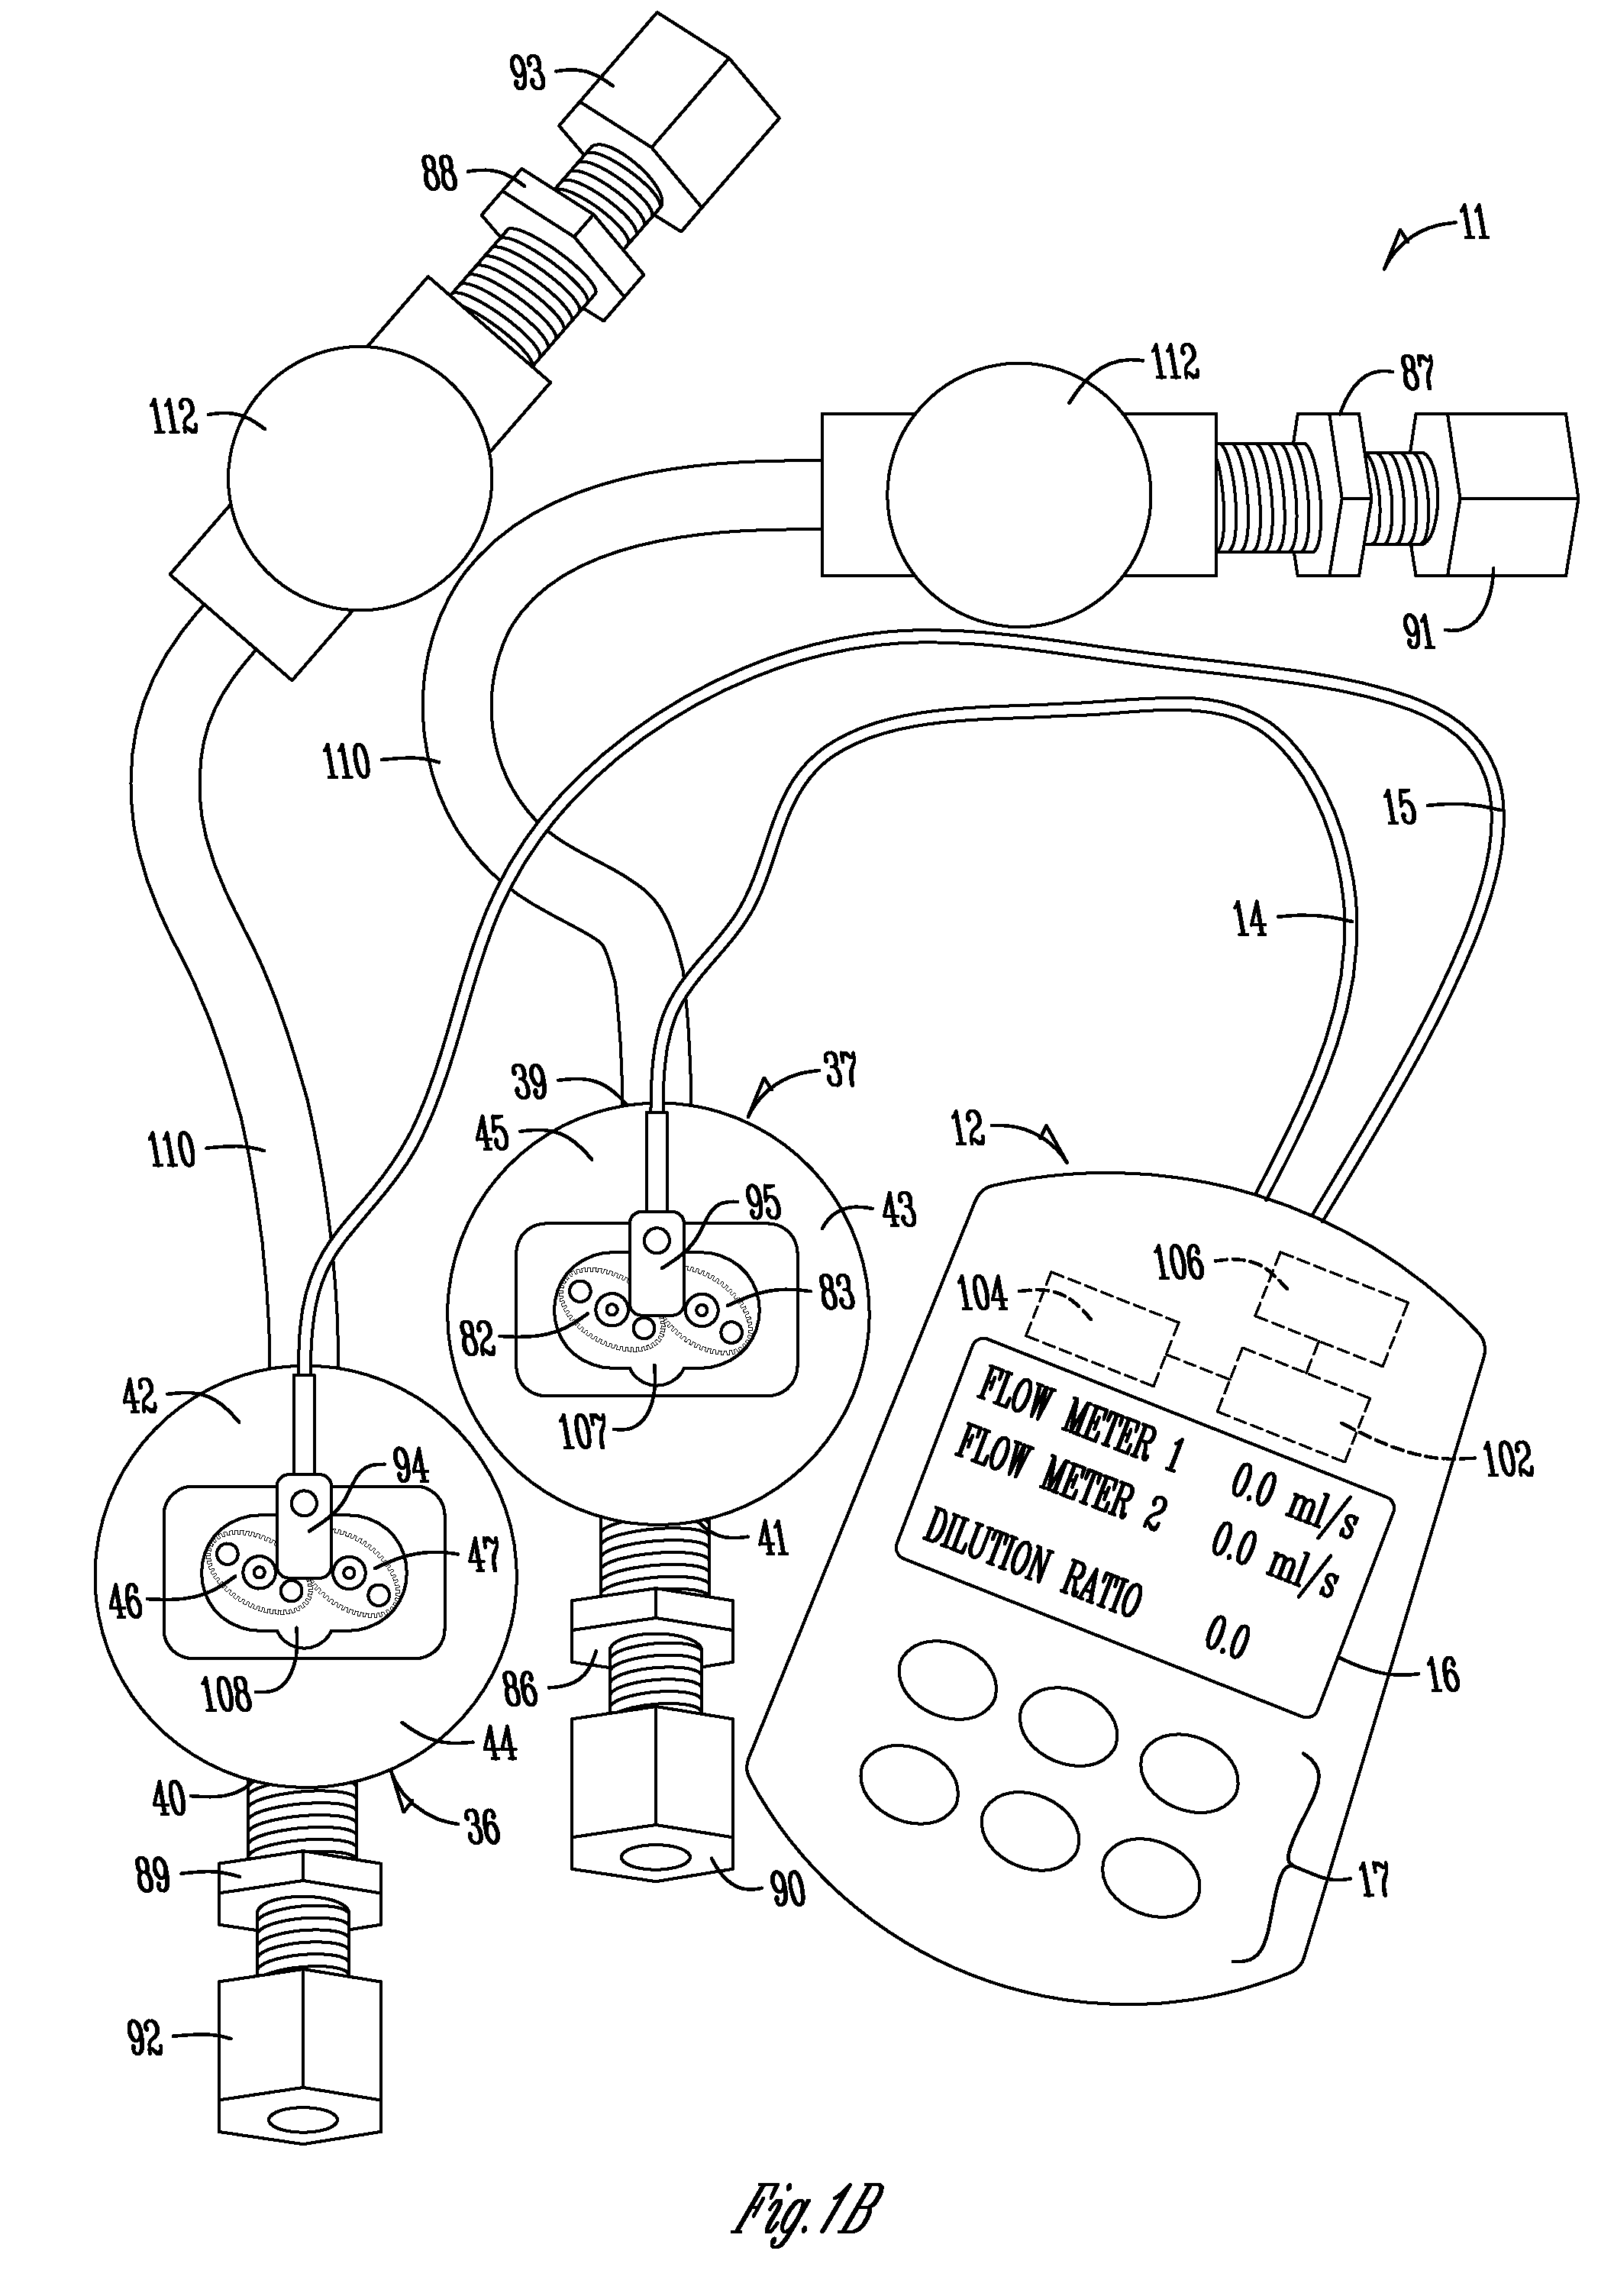 Apparatus, method and system for calibrating a liquid dispensing system